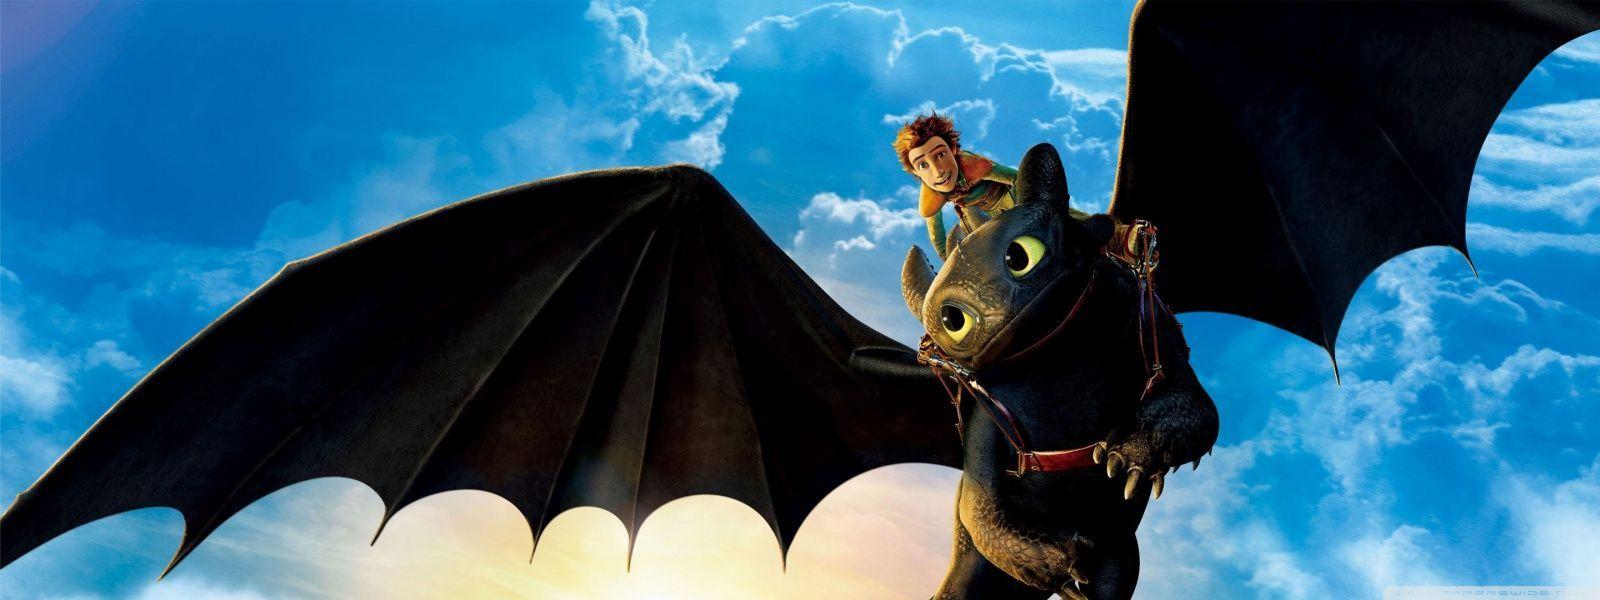 Hiccup and Toothless HD desktop wallpaper, High Definition